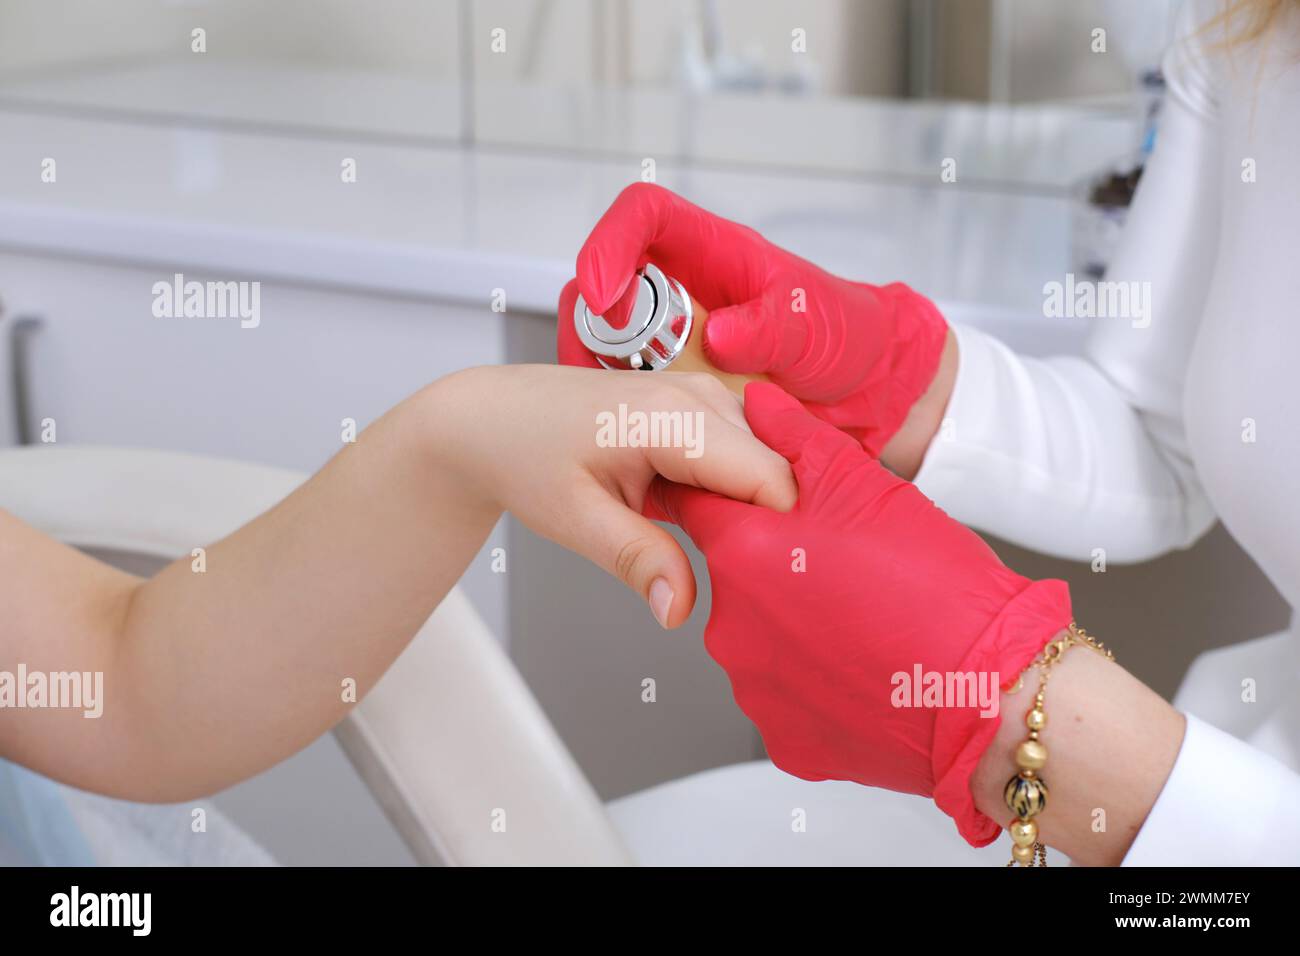 A cosmetologist in red gloves applies cream to a client's hand, with a focus on skincare treatment Stock Photo